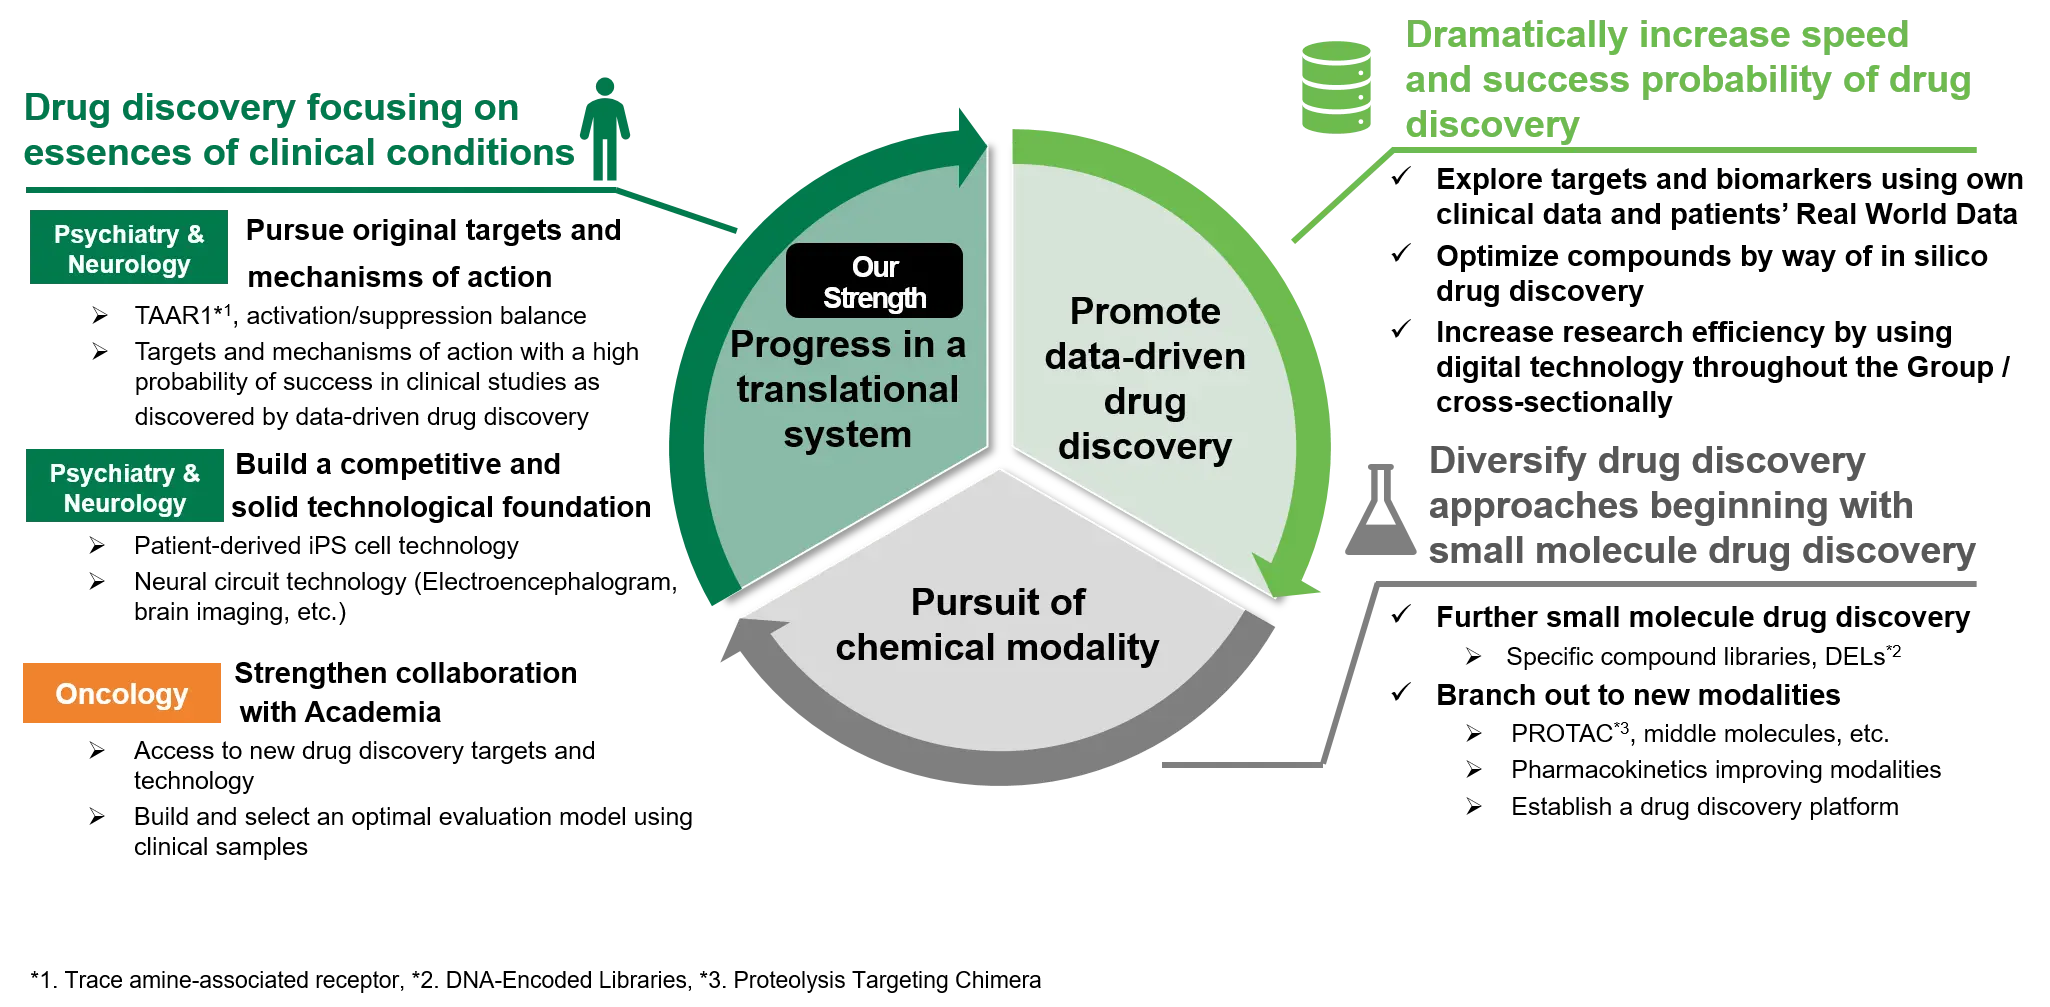 Drug Discovery Research